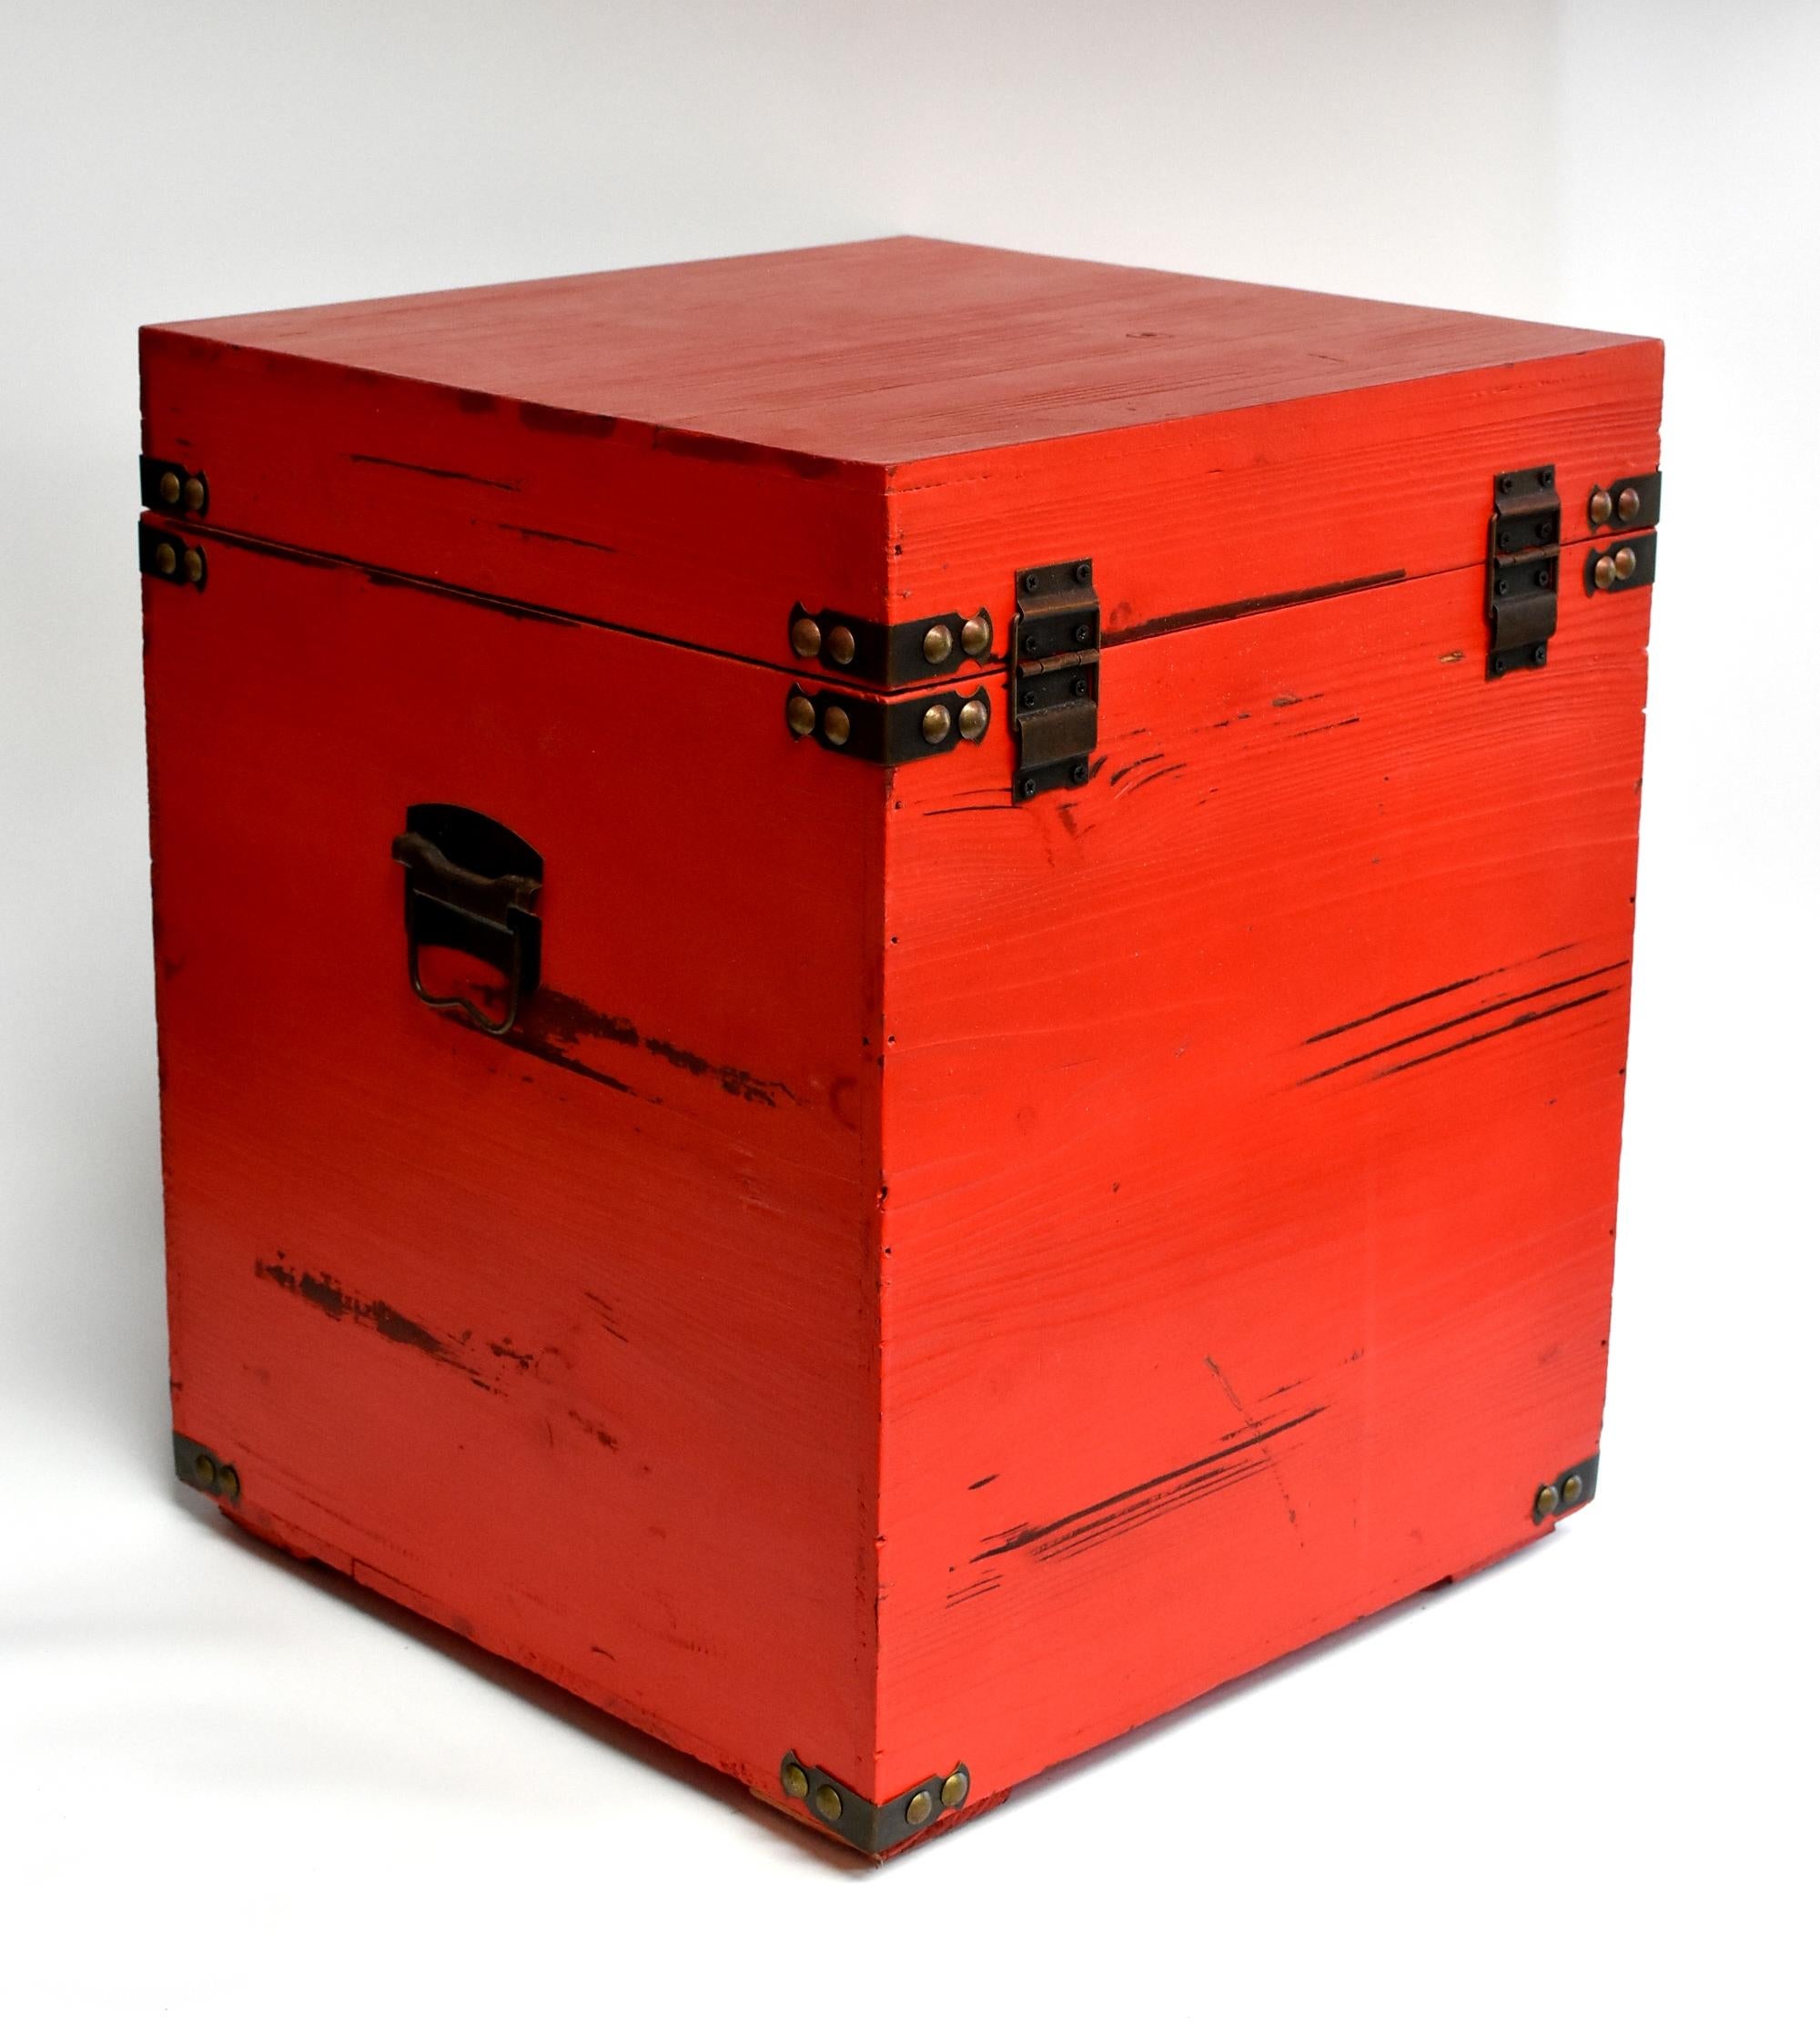 Contemporary Red Wooden Cube Box, Side Table, Bakery Print New